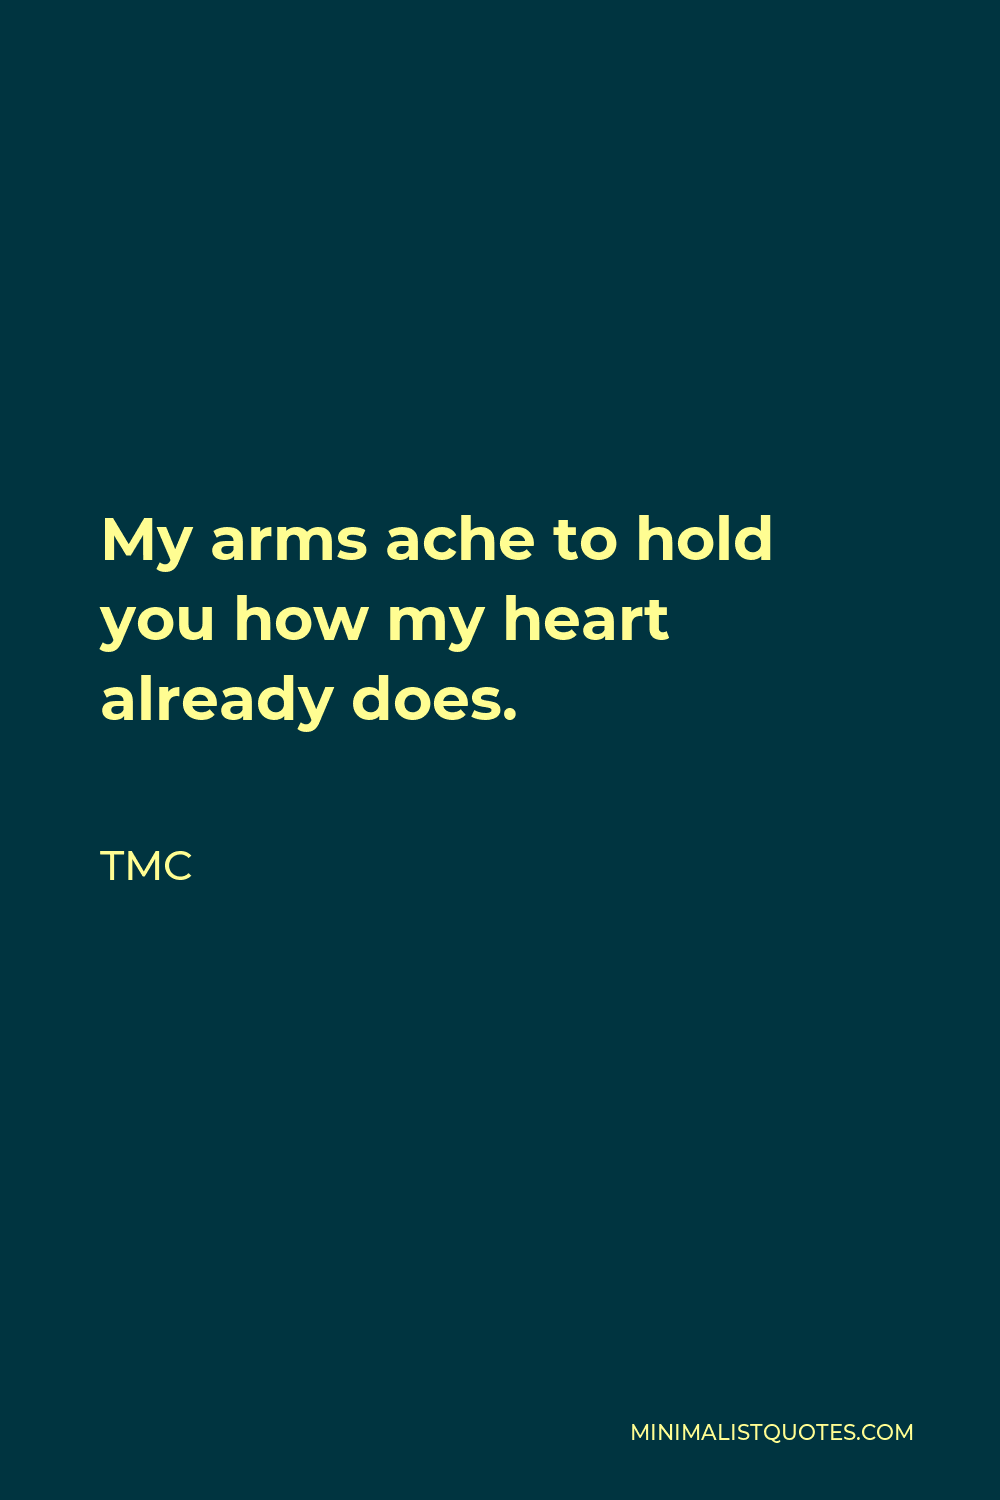 TMC Quote - My arms ache to hold you how my heart already does.